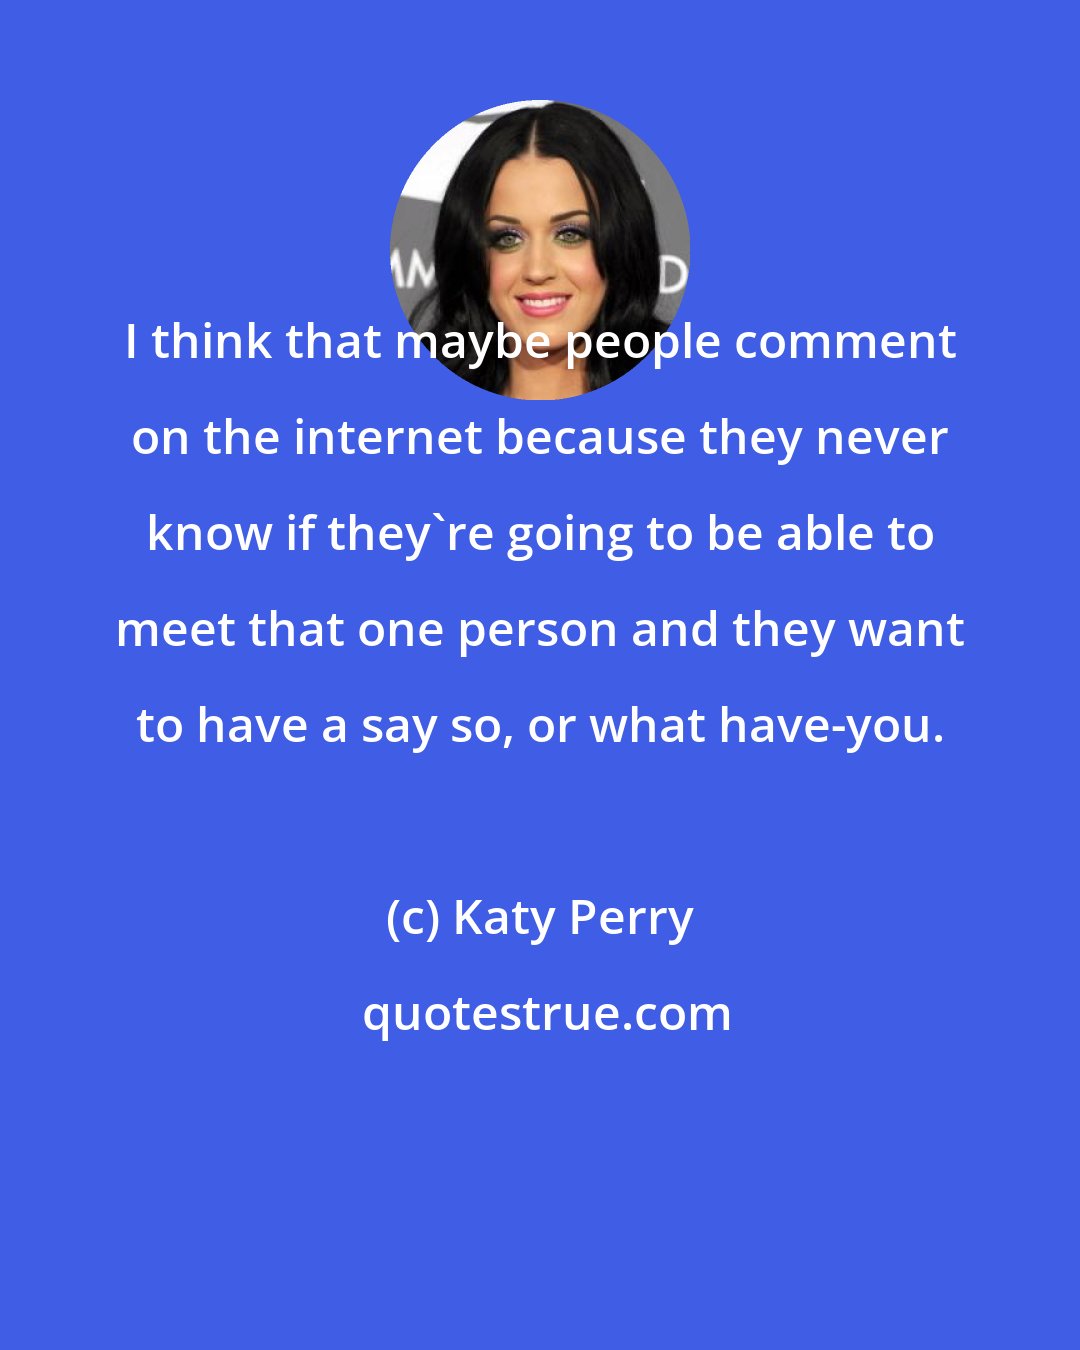 Katy Perry: I think that maybe people comment on the internet because they never know if they're going to be able to meet that one person and they want to have a say so, or what have-you.